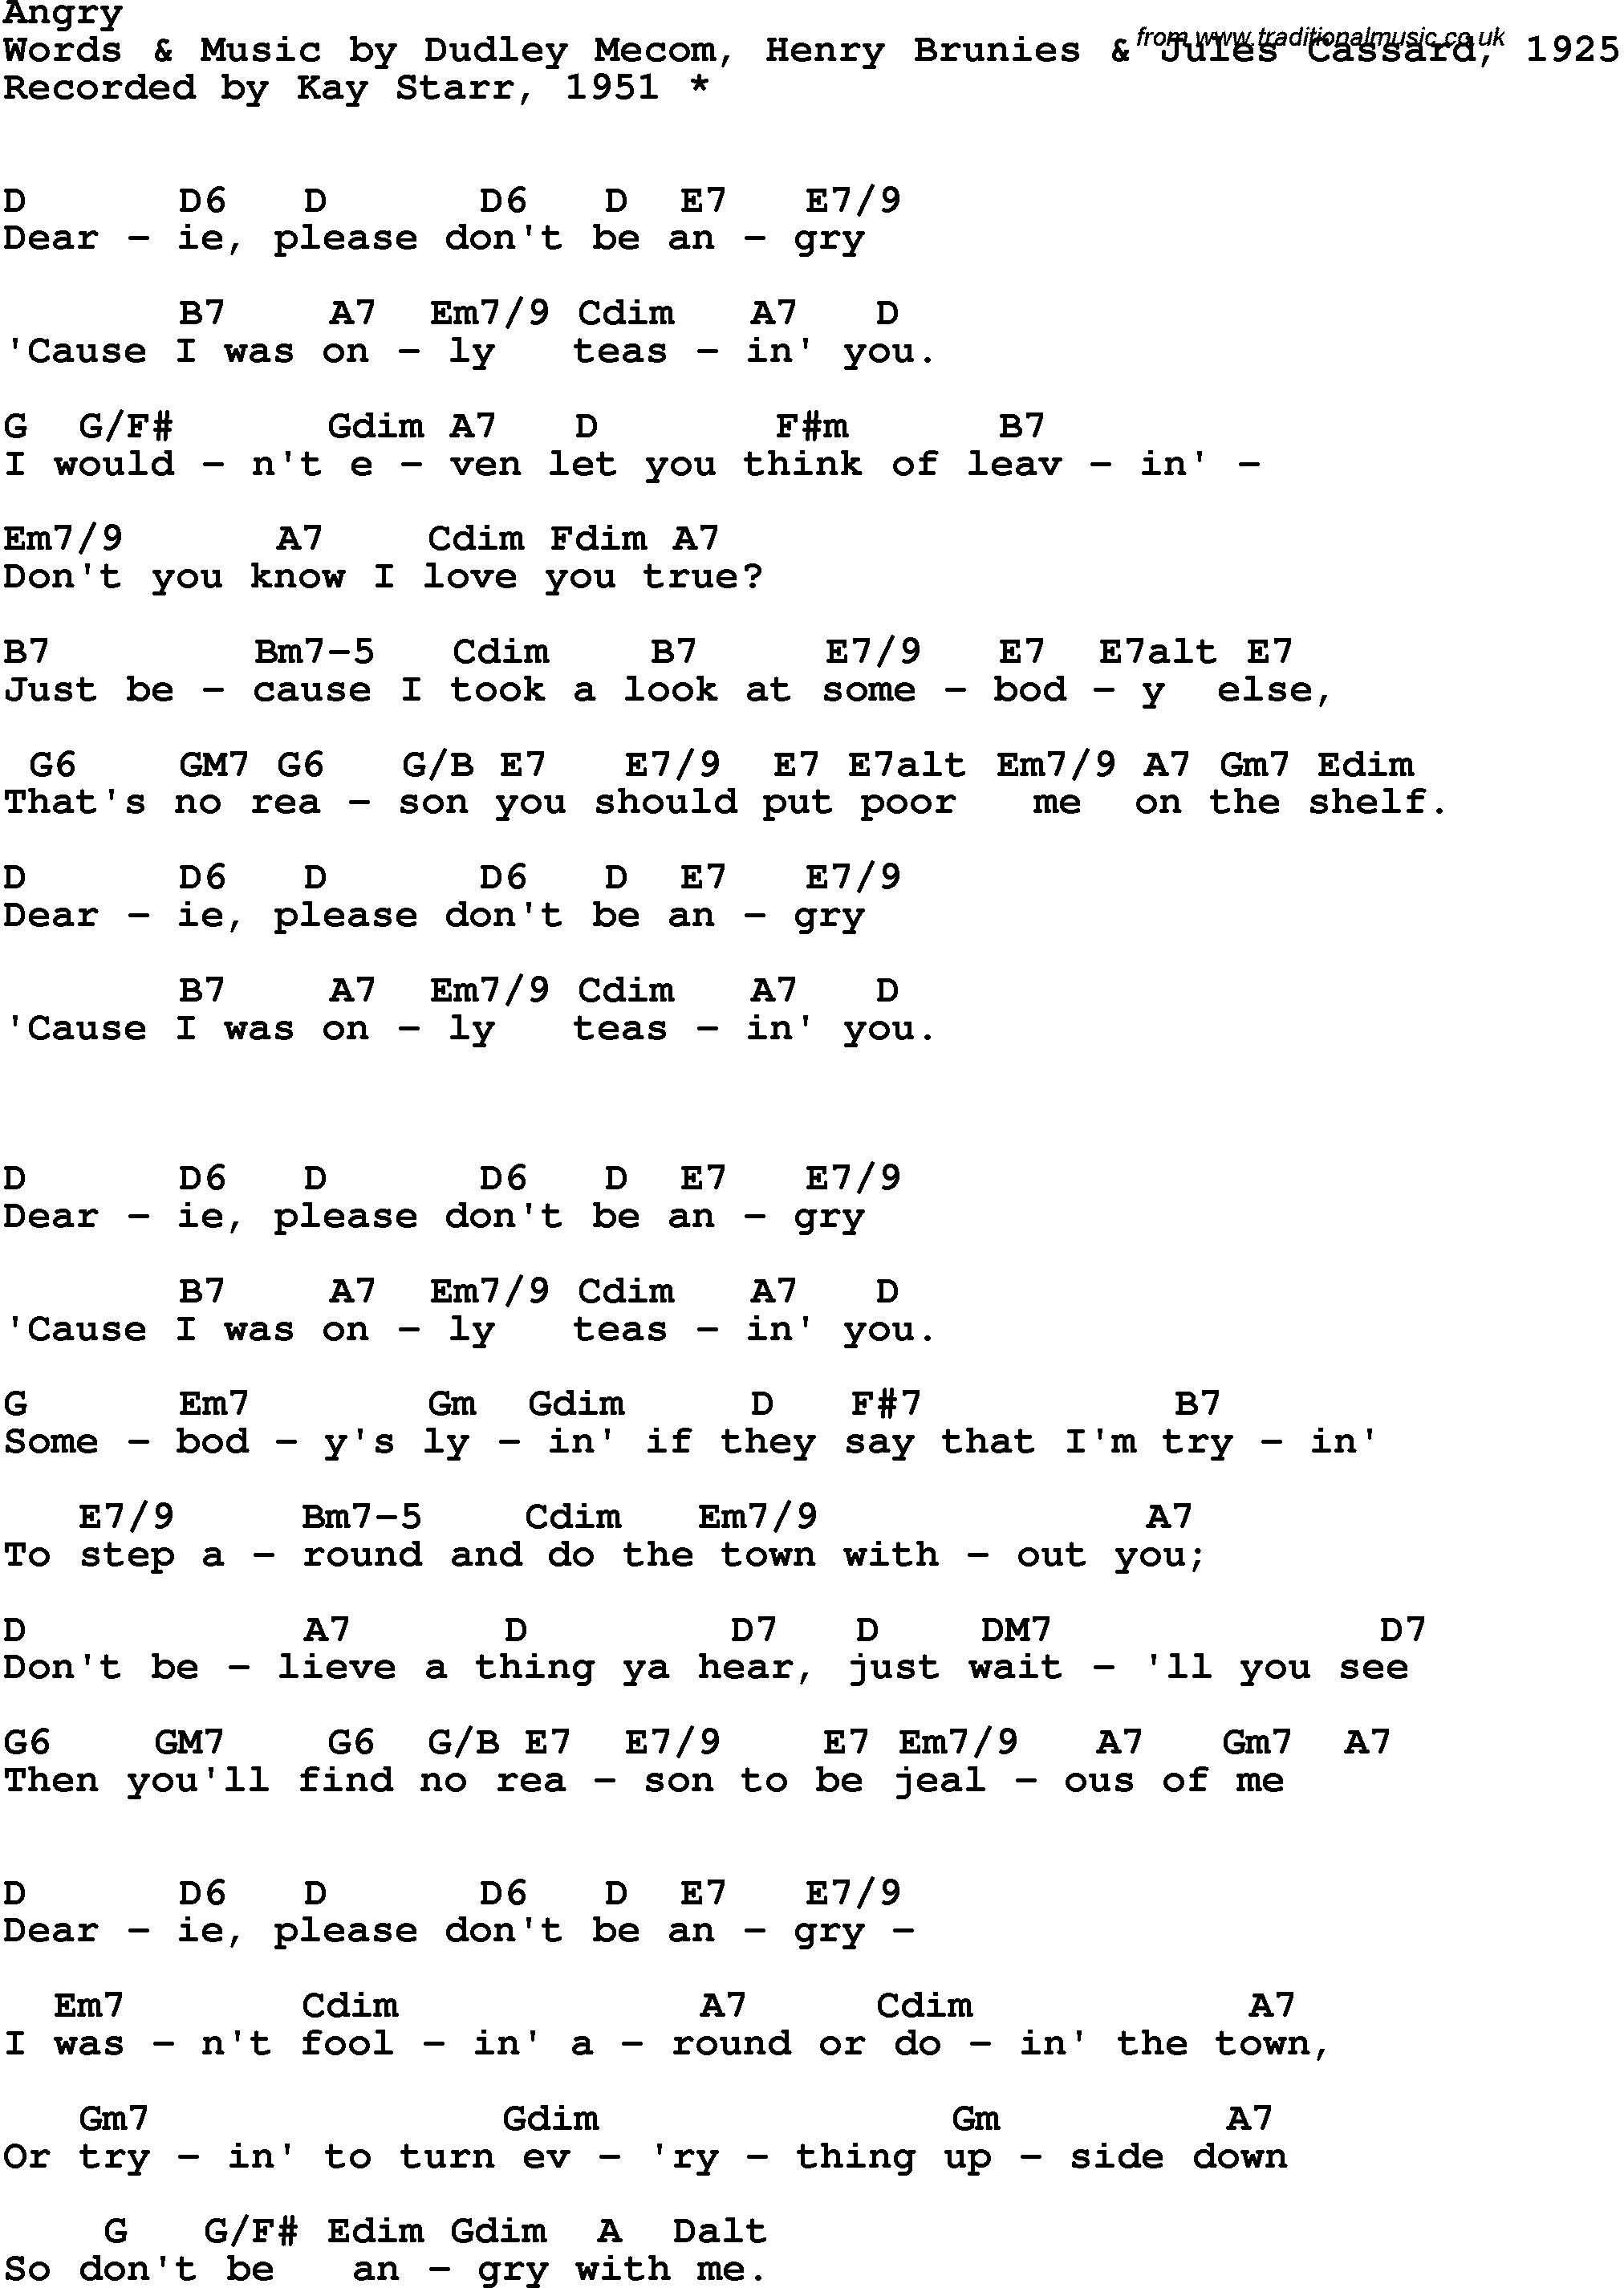 Song Lyrics with guitar chords for Angry - Kay Starr, 1951